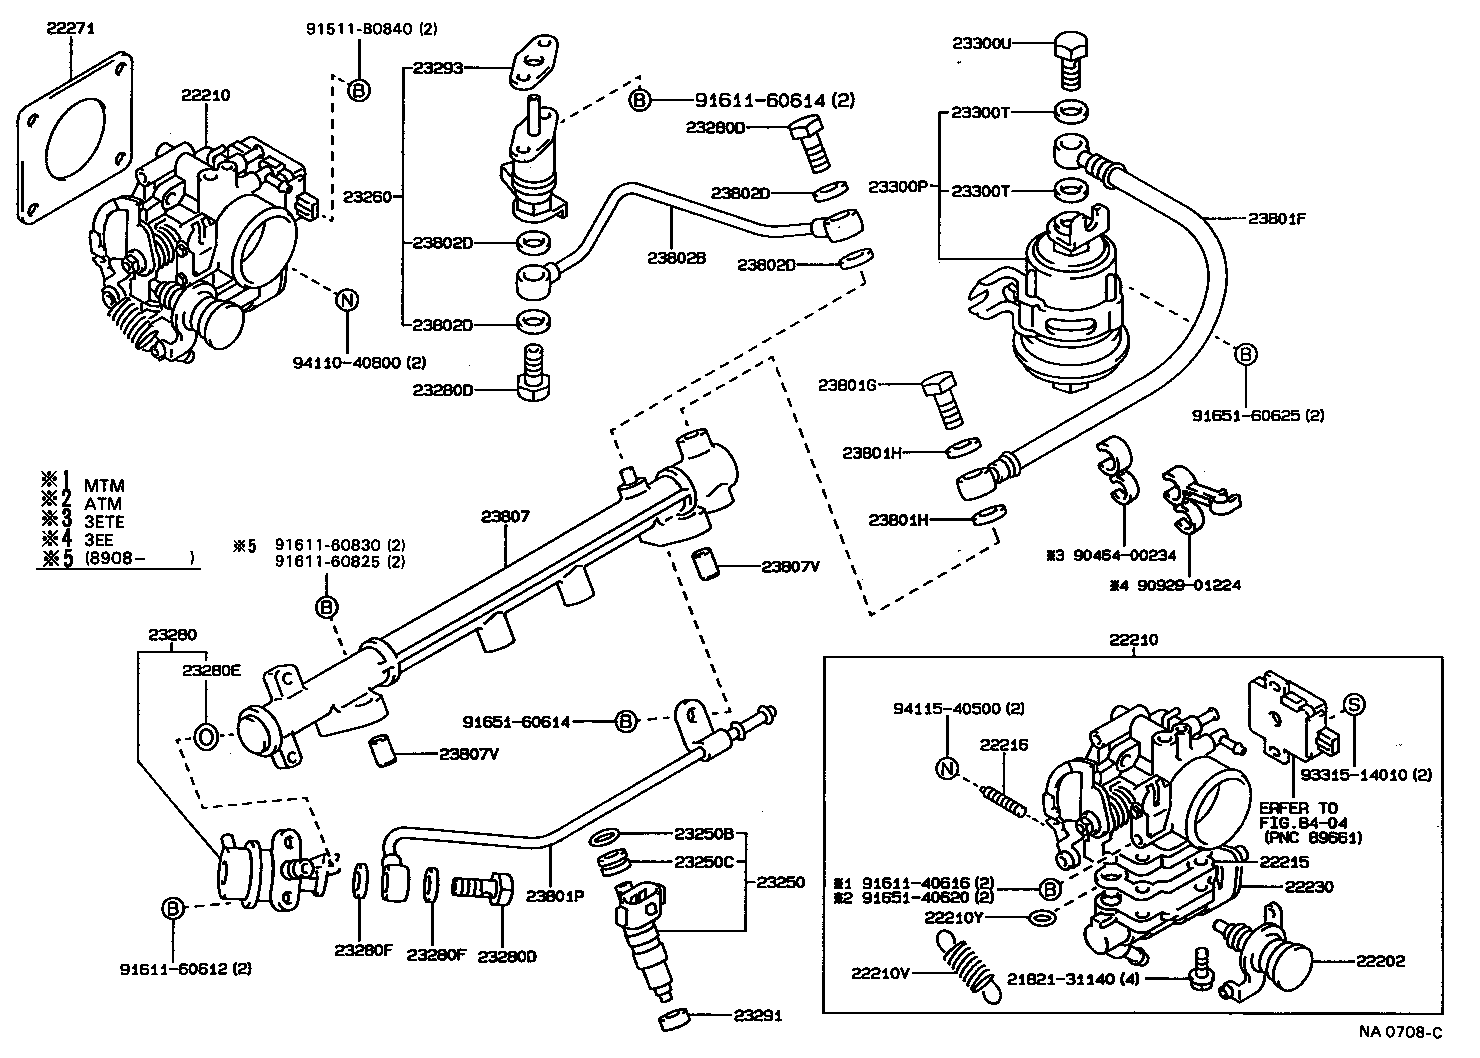  COROLLA 2 |  FUEL INJECTION SYSTEM